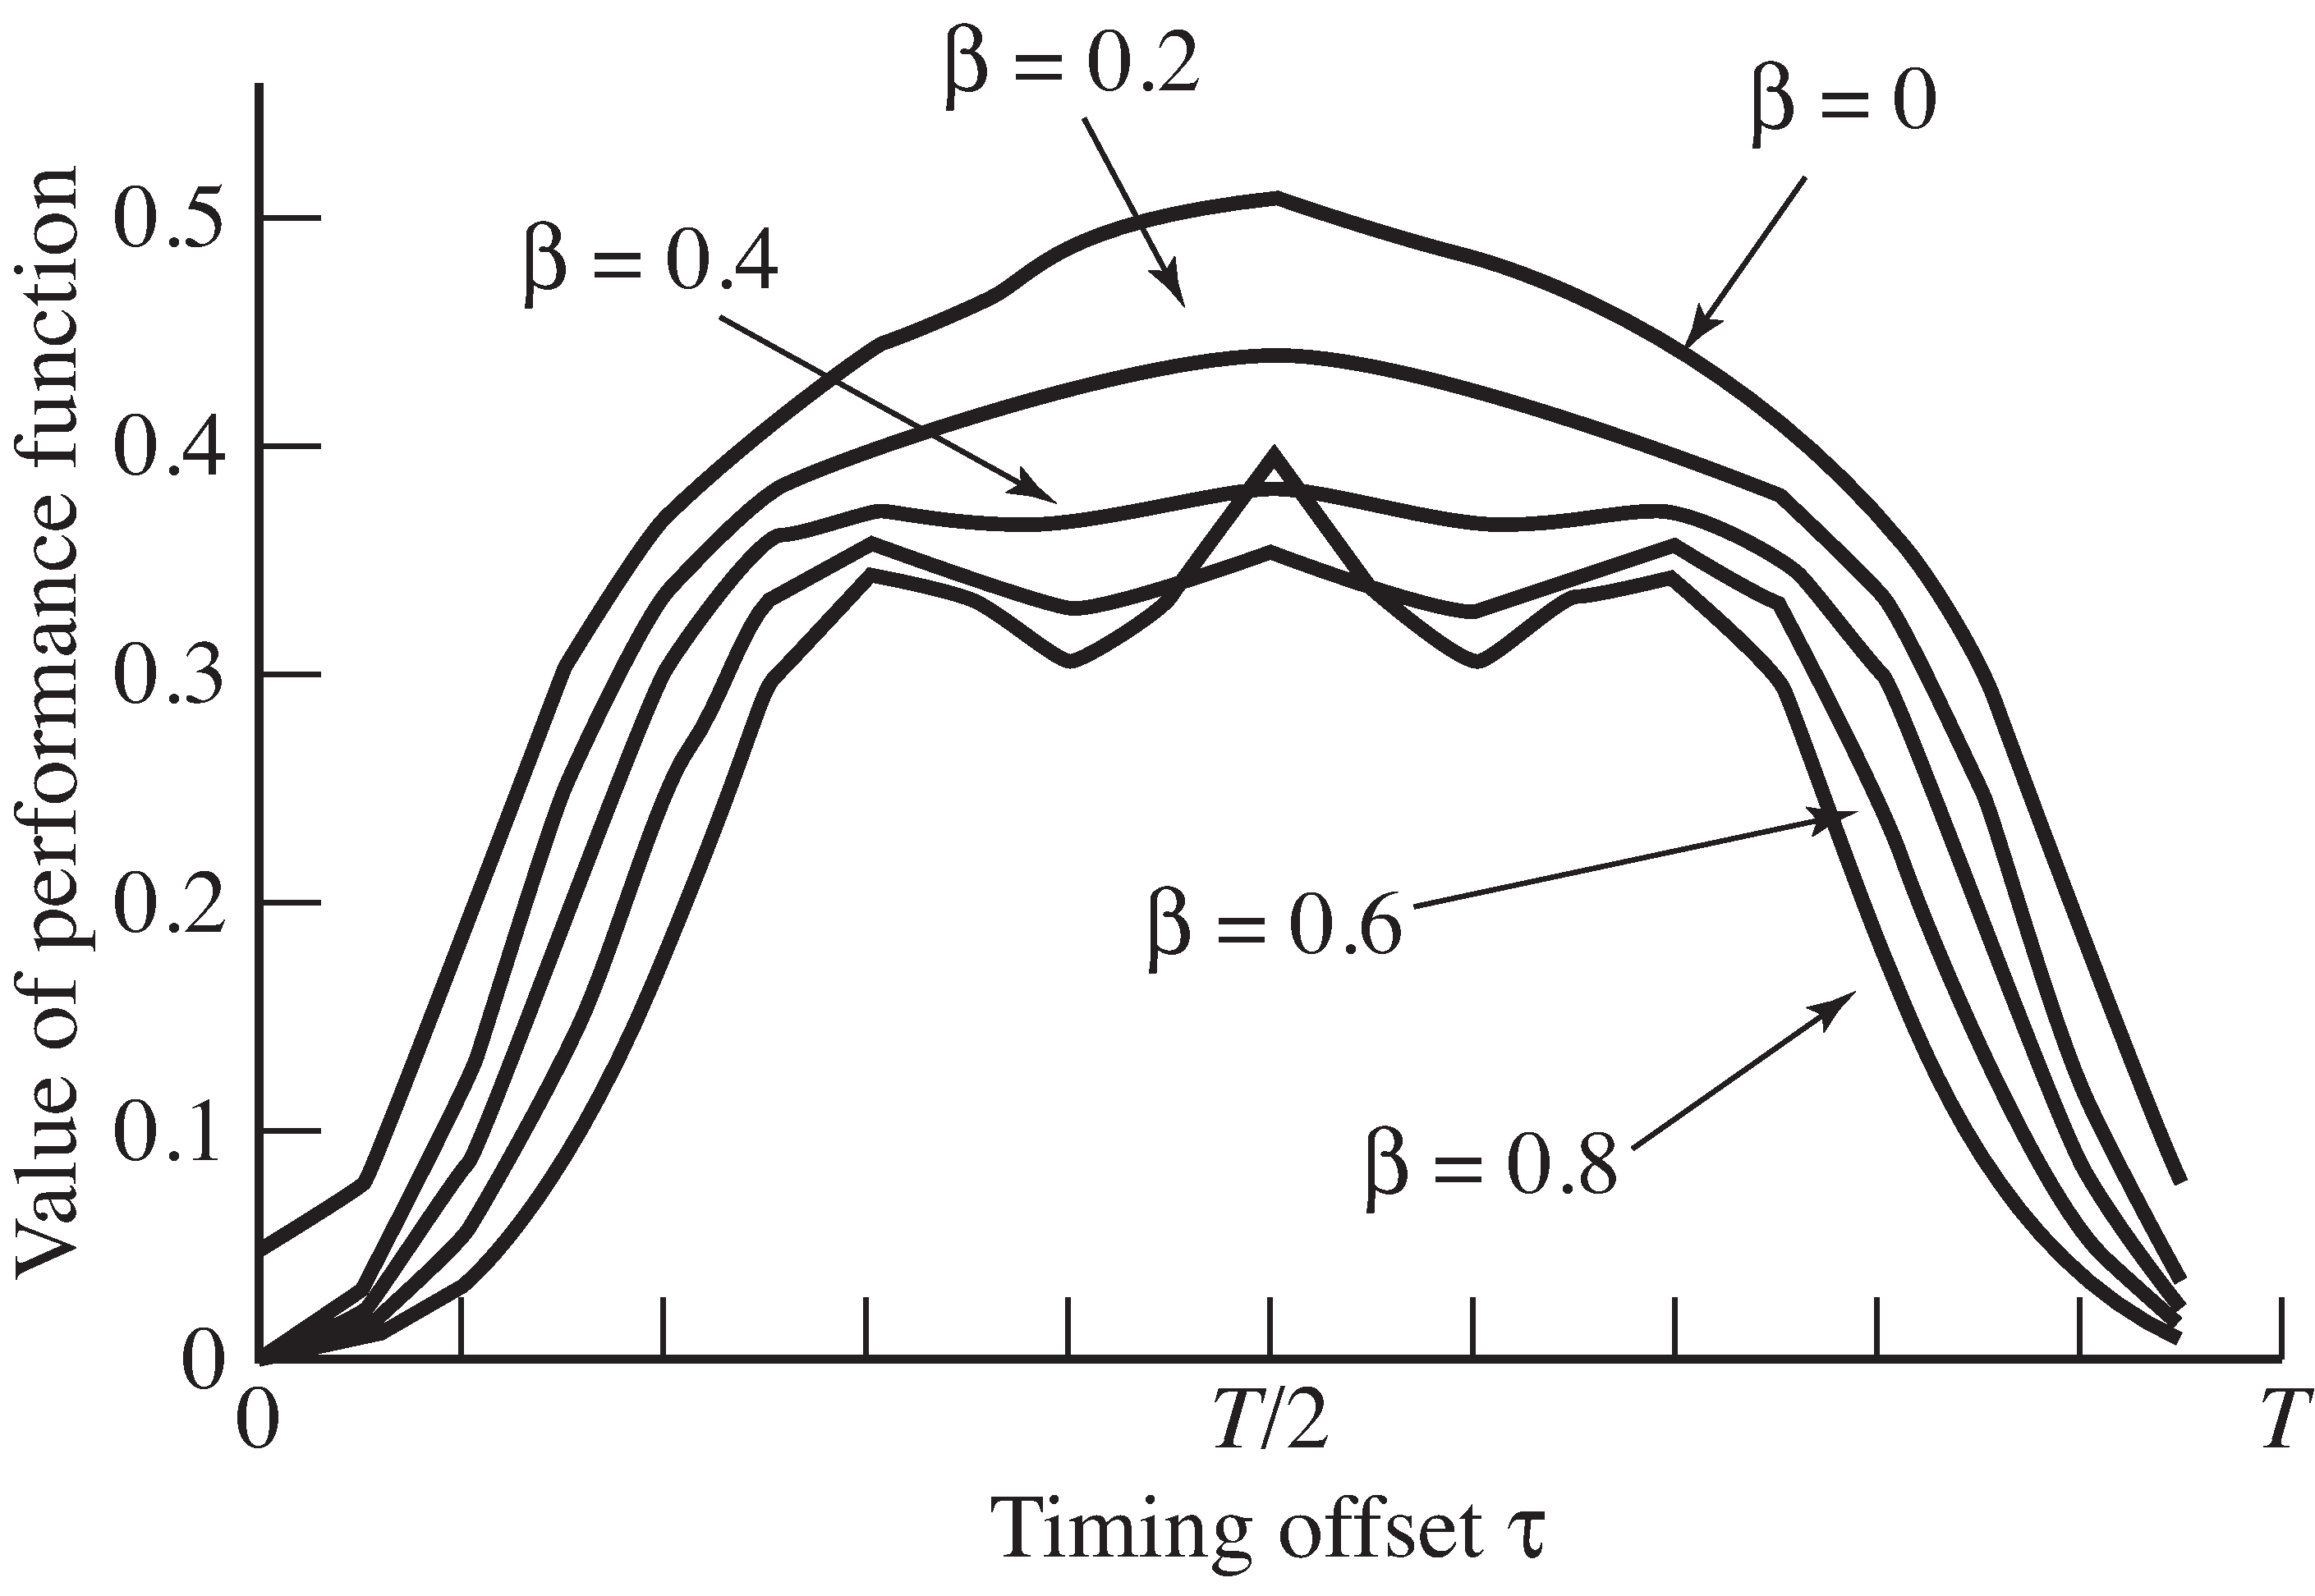 The performance function Equation 15 is plotted as a function of the timing offset τ for five different pulse shapes characterized by different rolloff factors β. The correct answer is at the global minimum at τ=0.